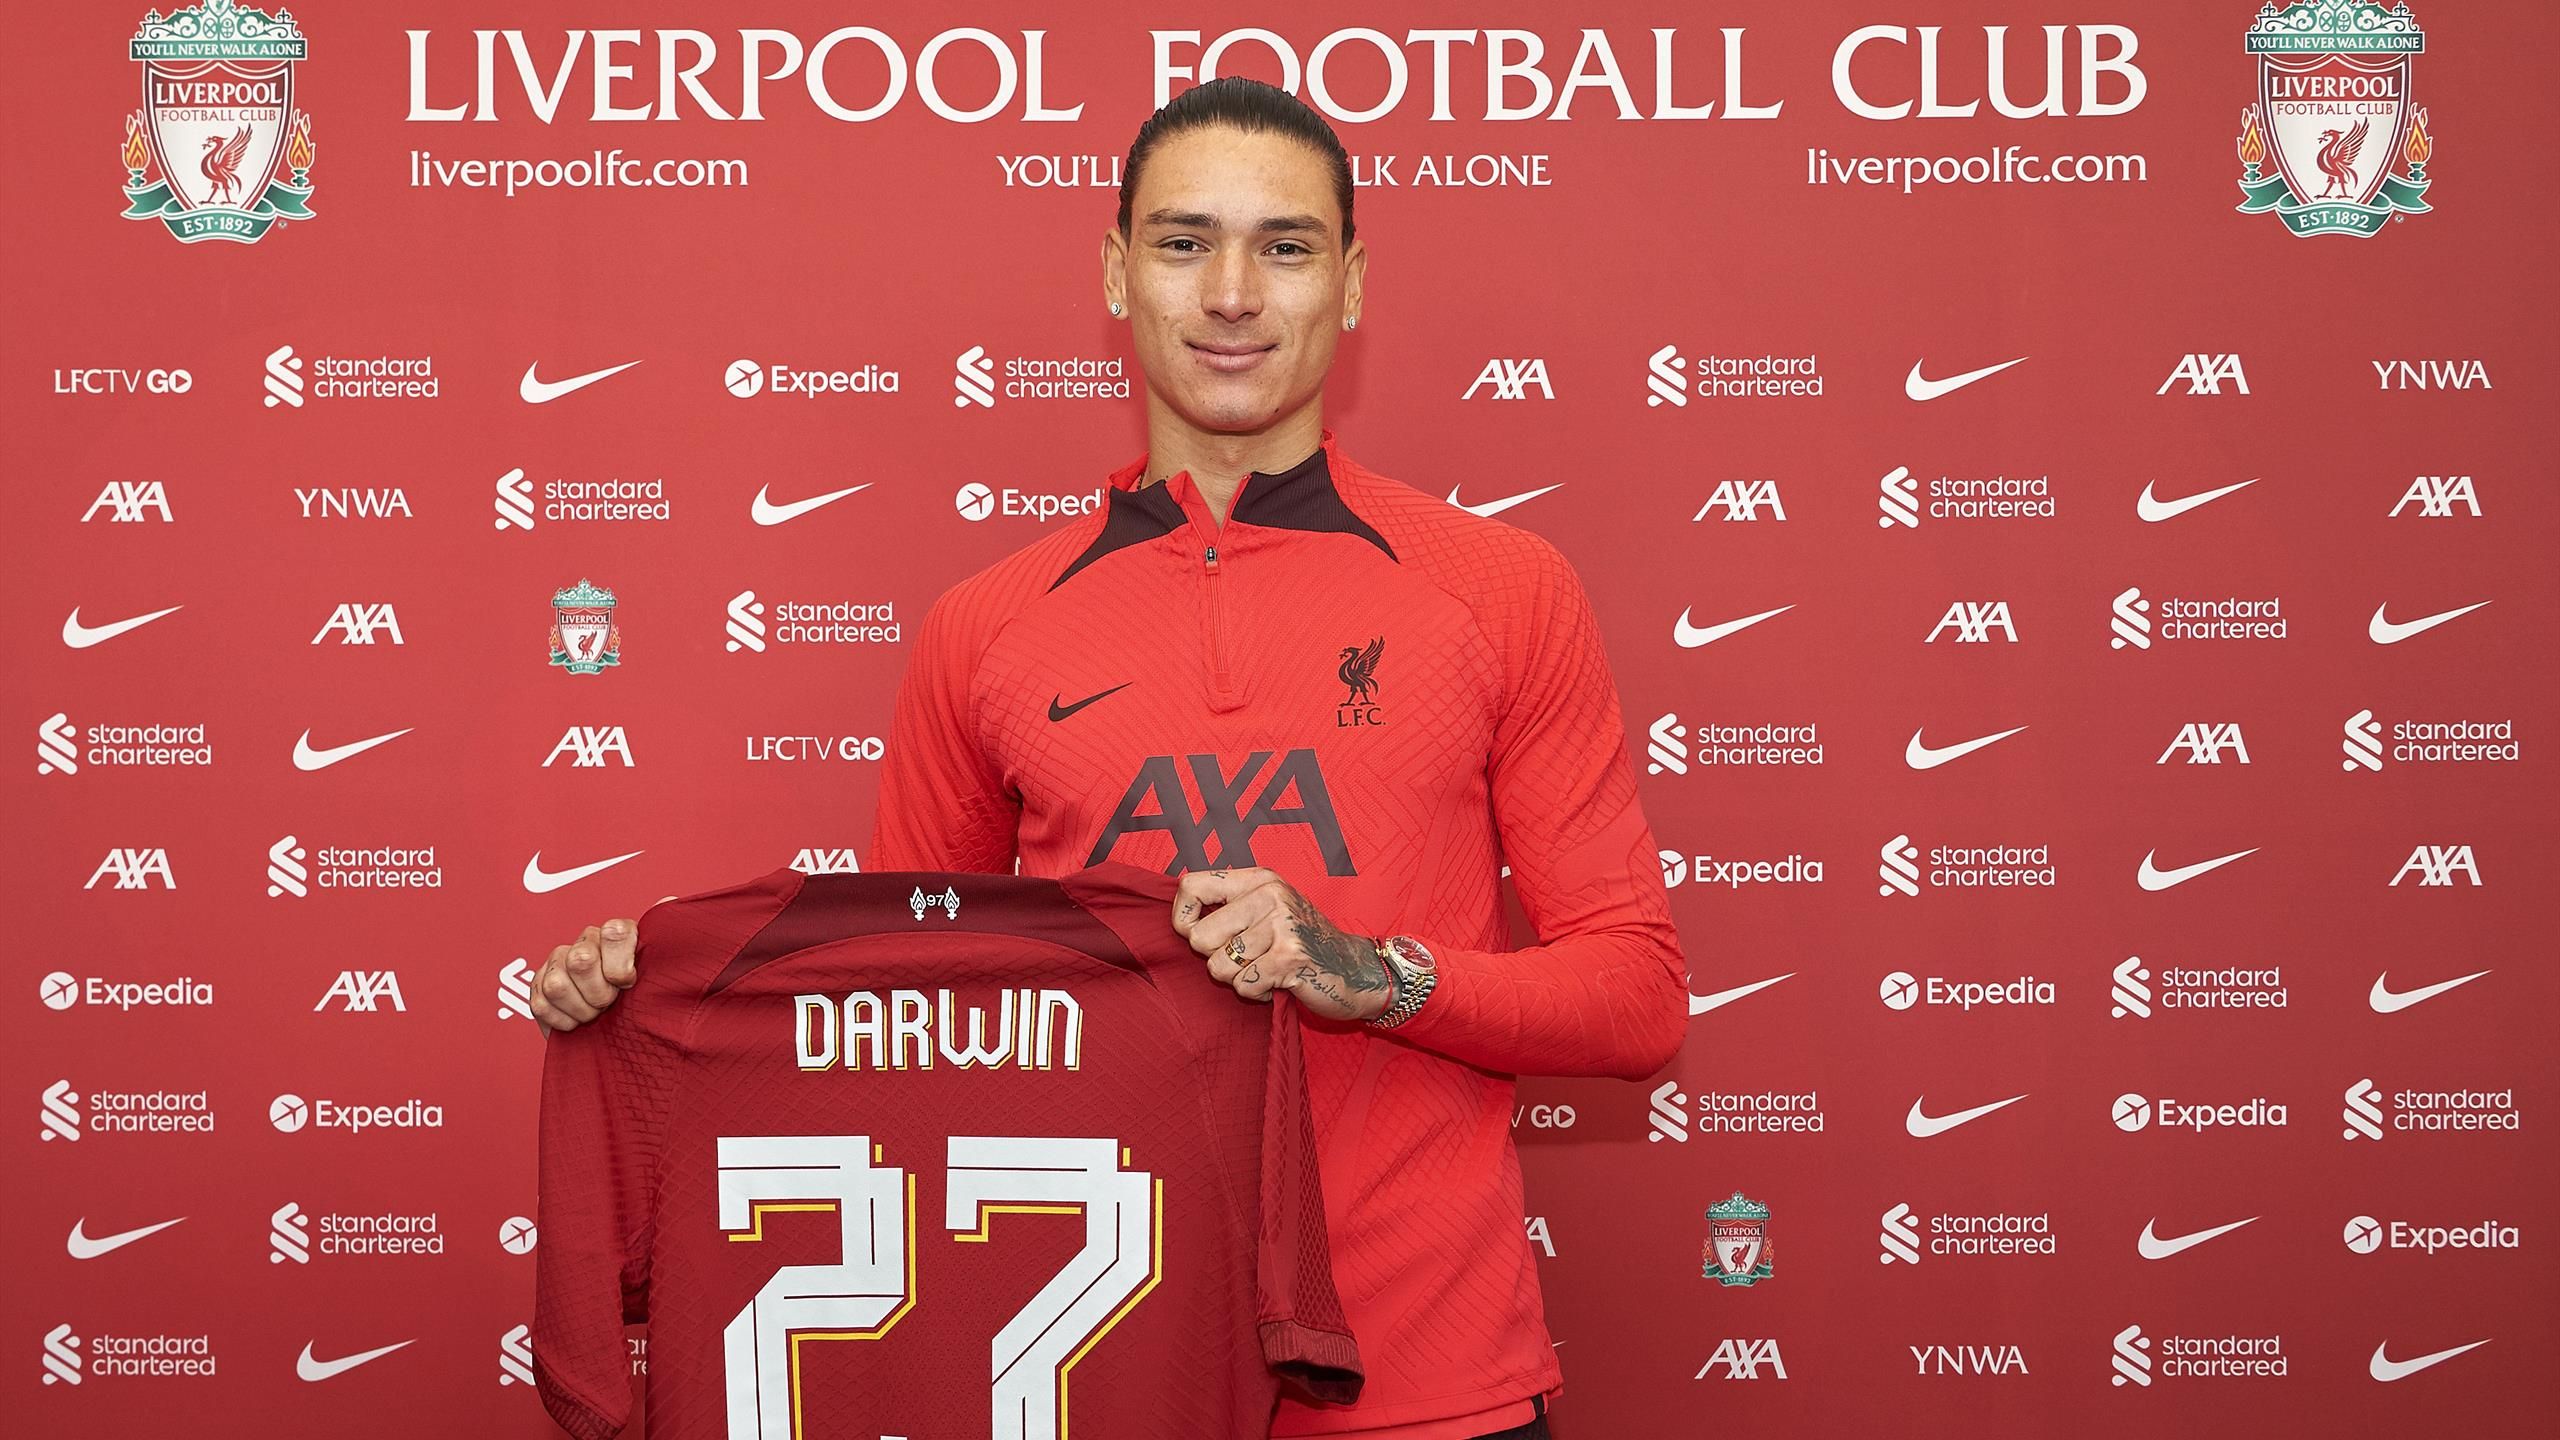 Darwin Nunez: Liverpool Sign Striker From Benfica In A Potential Club Record Deal Worth Up To €100m